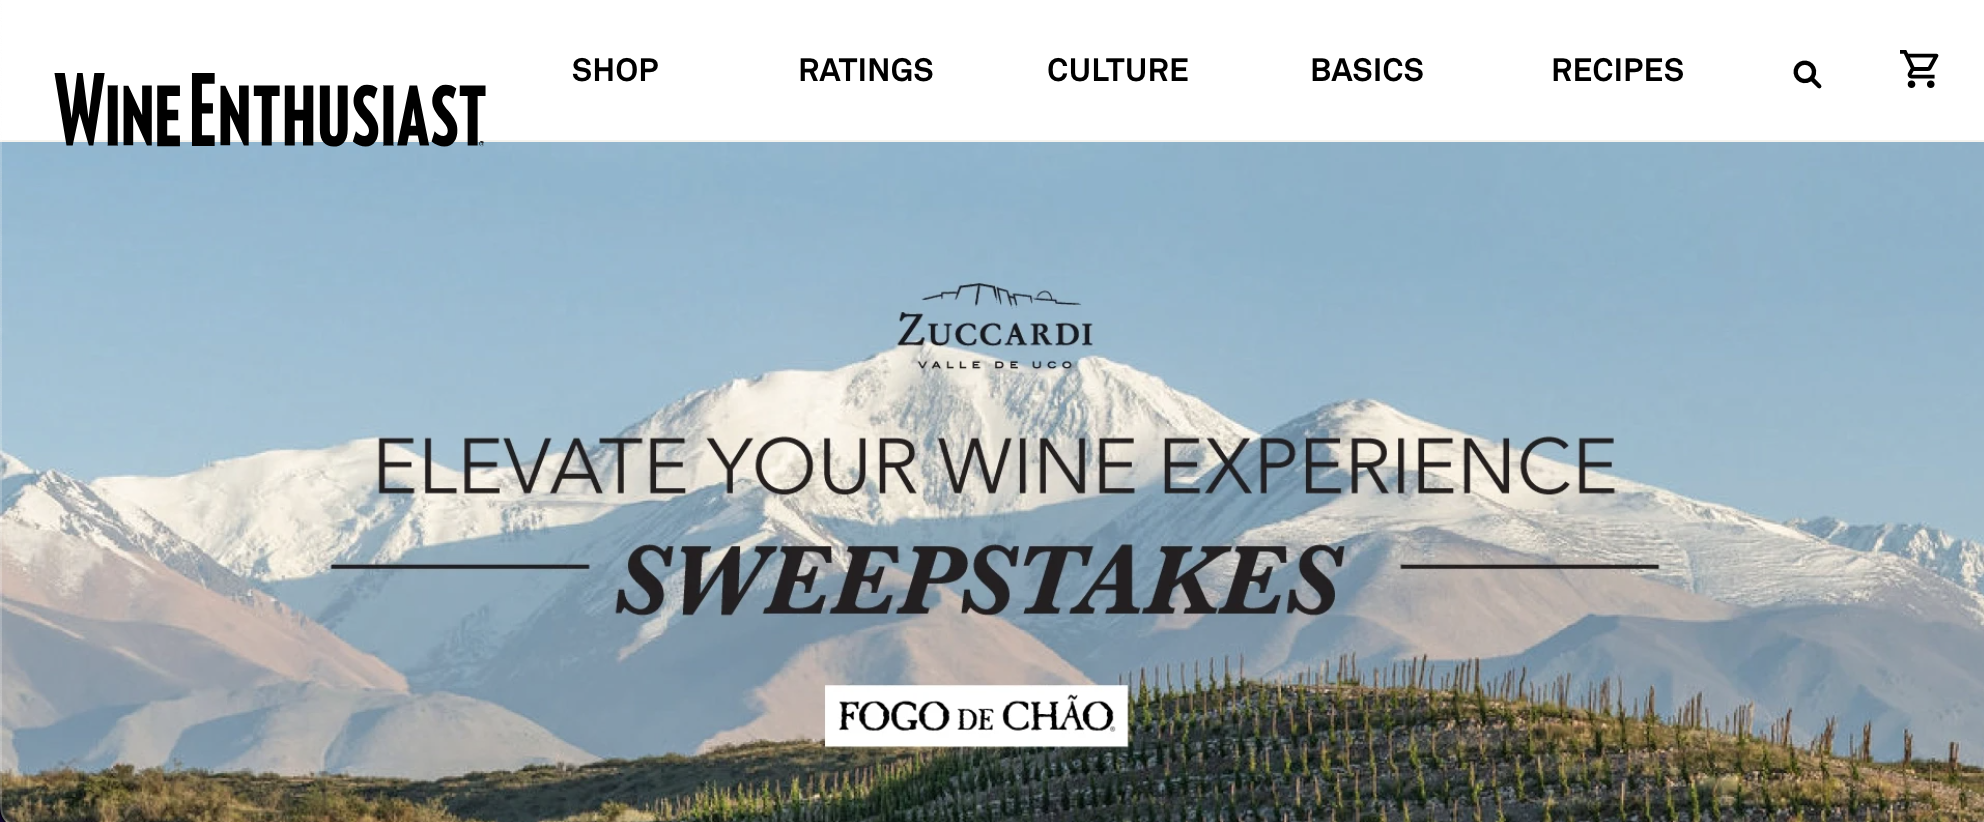 Zuccardi Elevate Your Wine Experience Sweepstakes Screenshot of Page